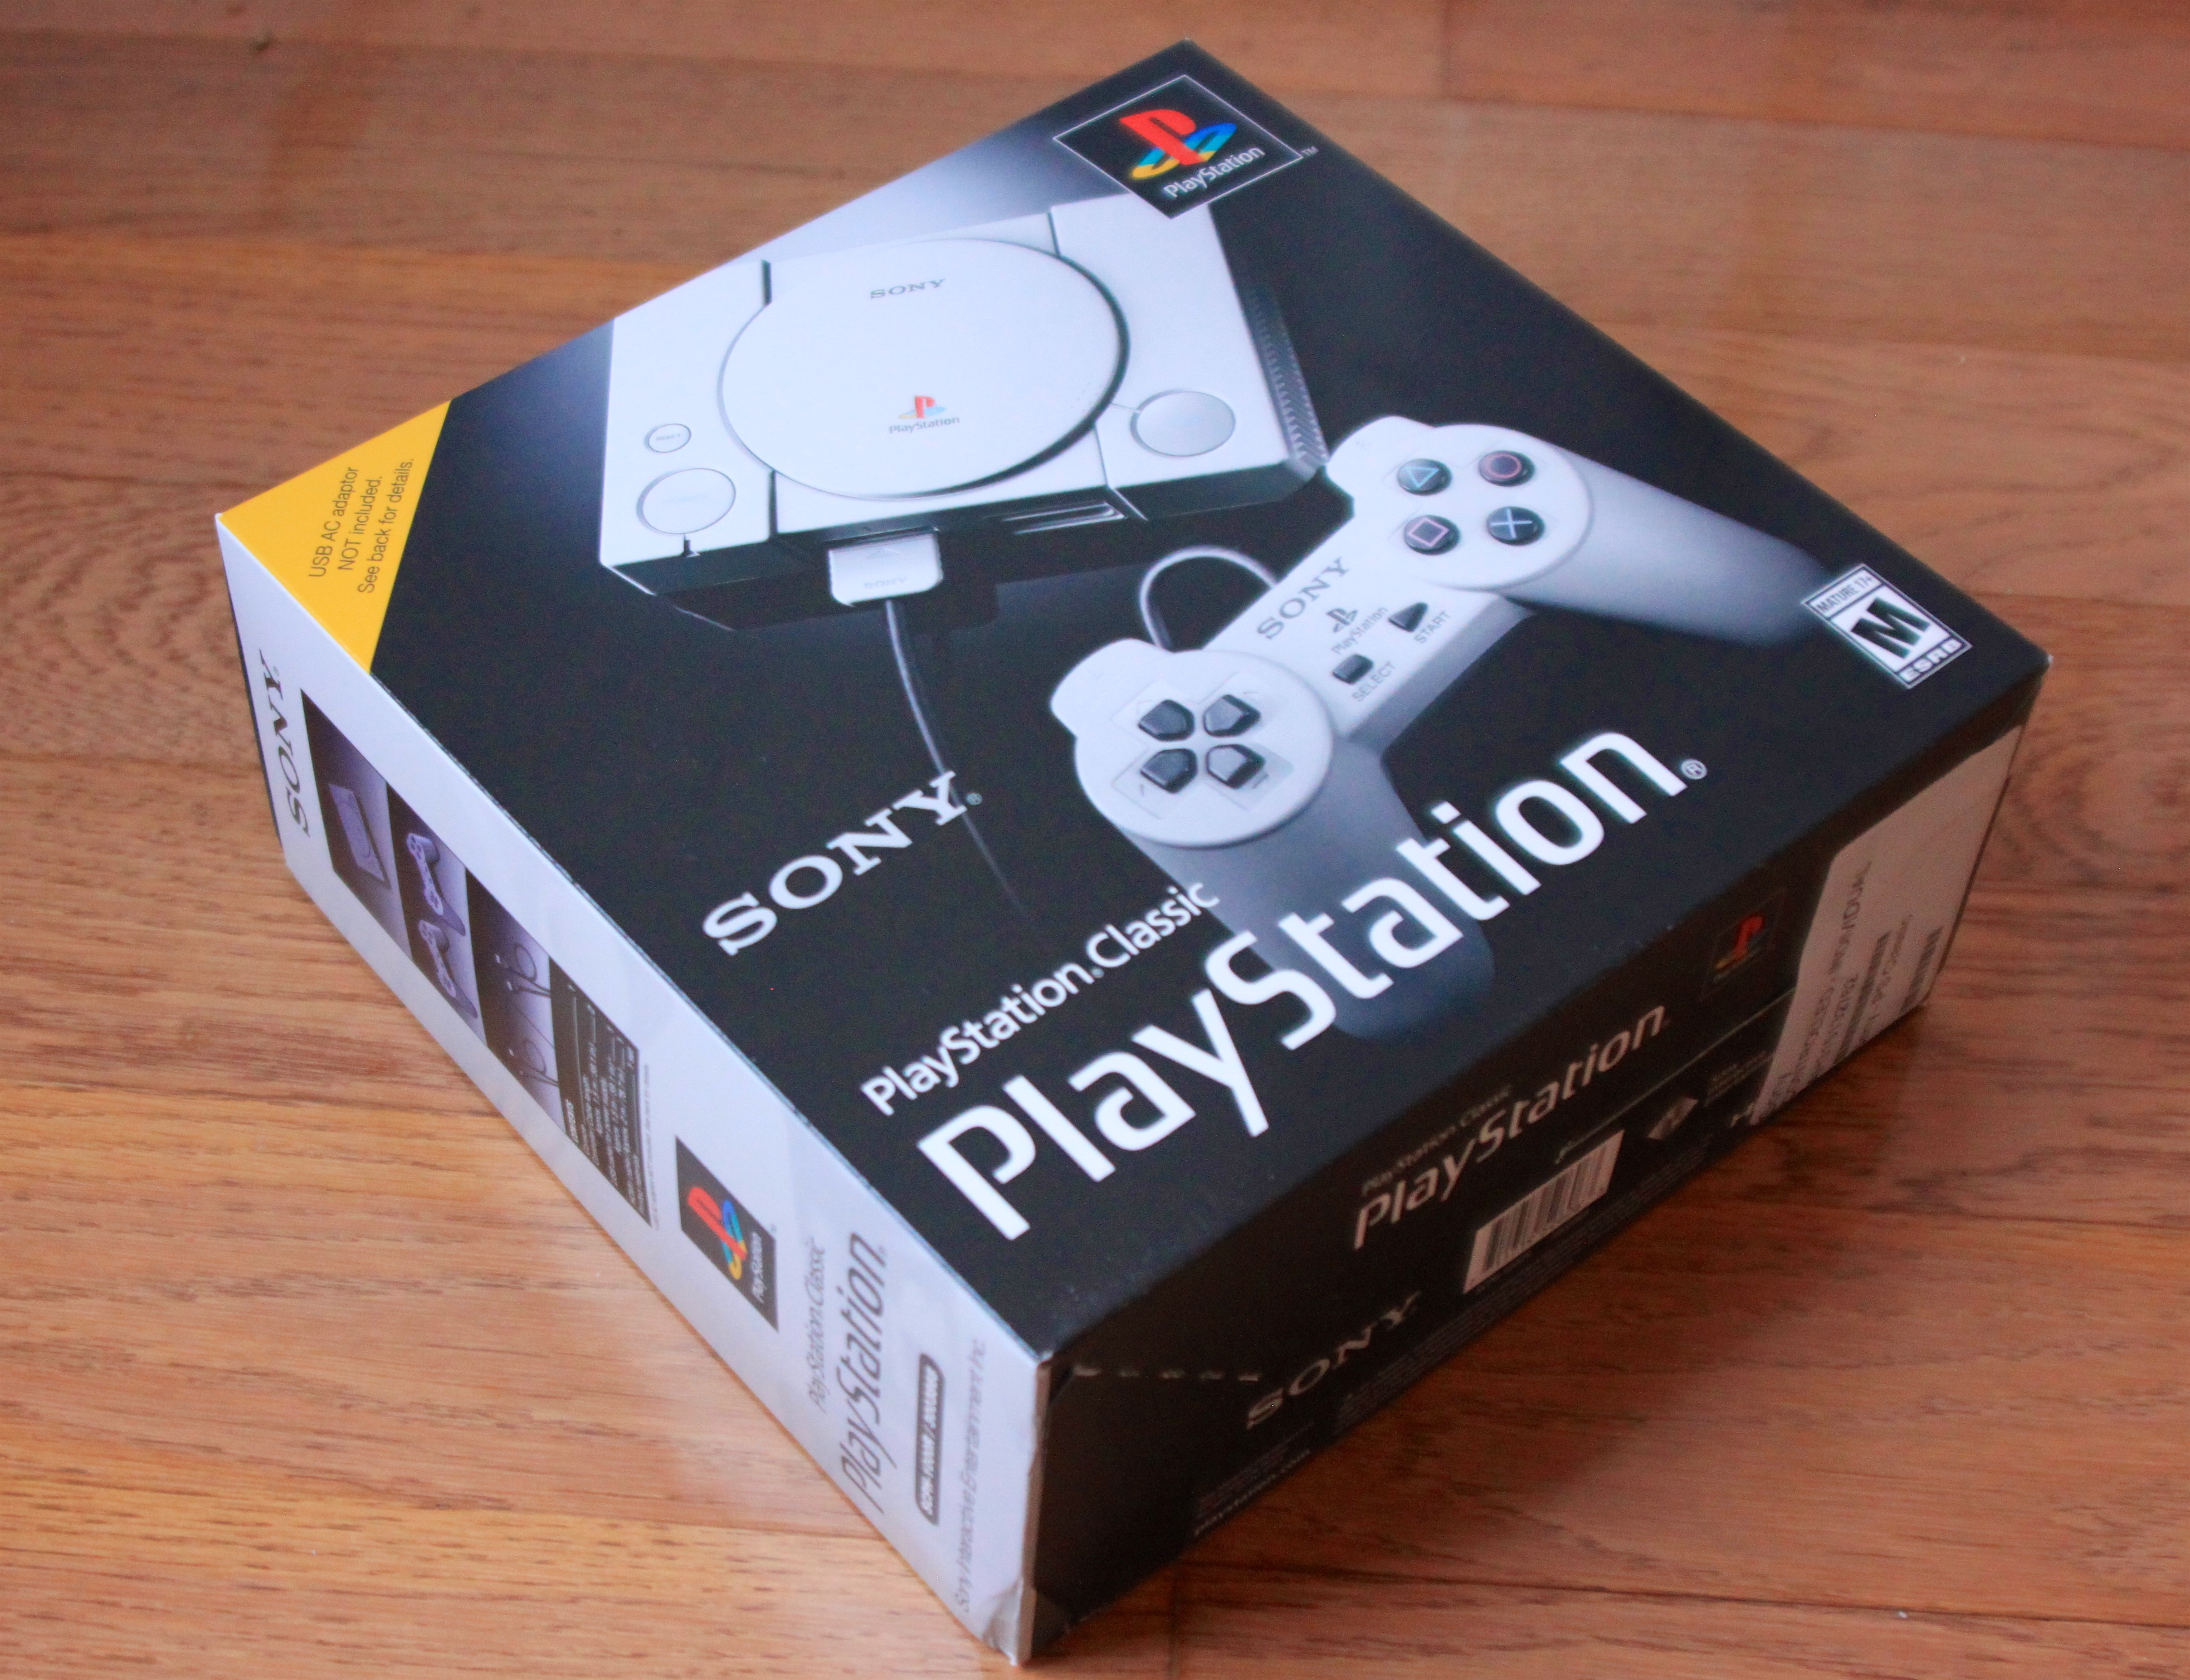 PlayStation Classic review: A far-from-classic experience